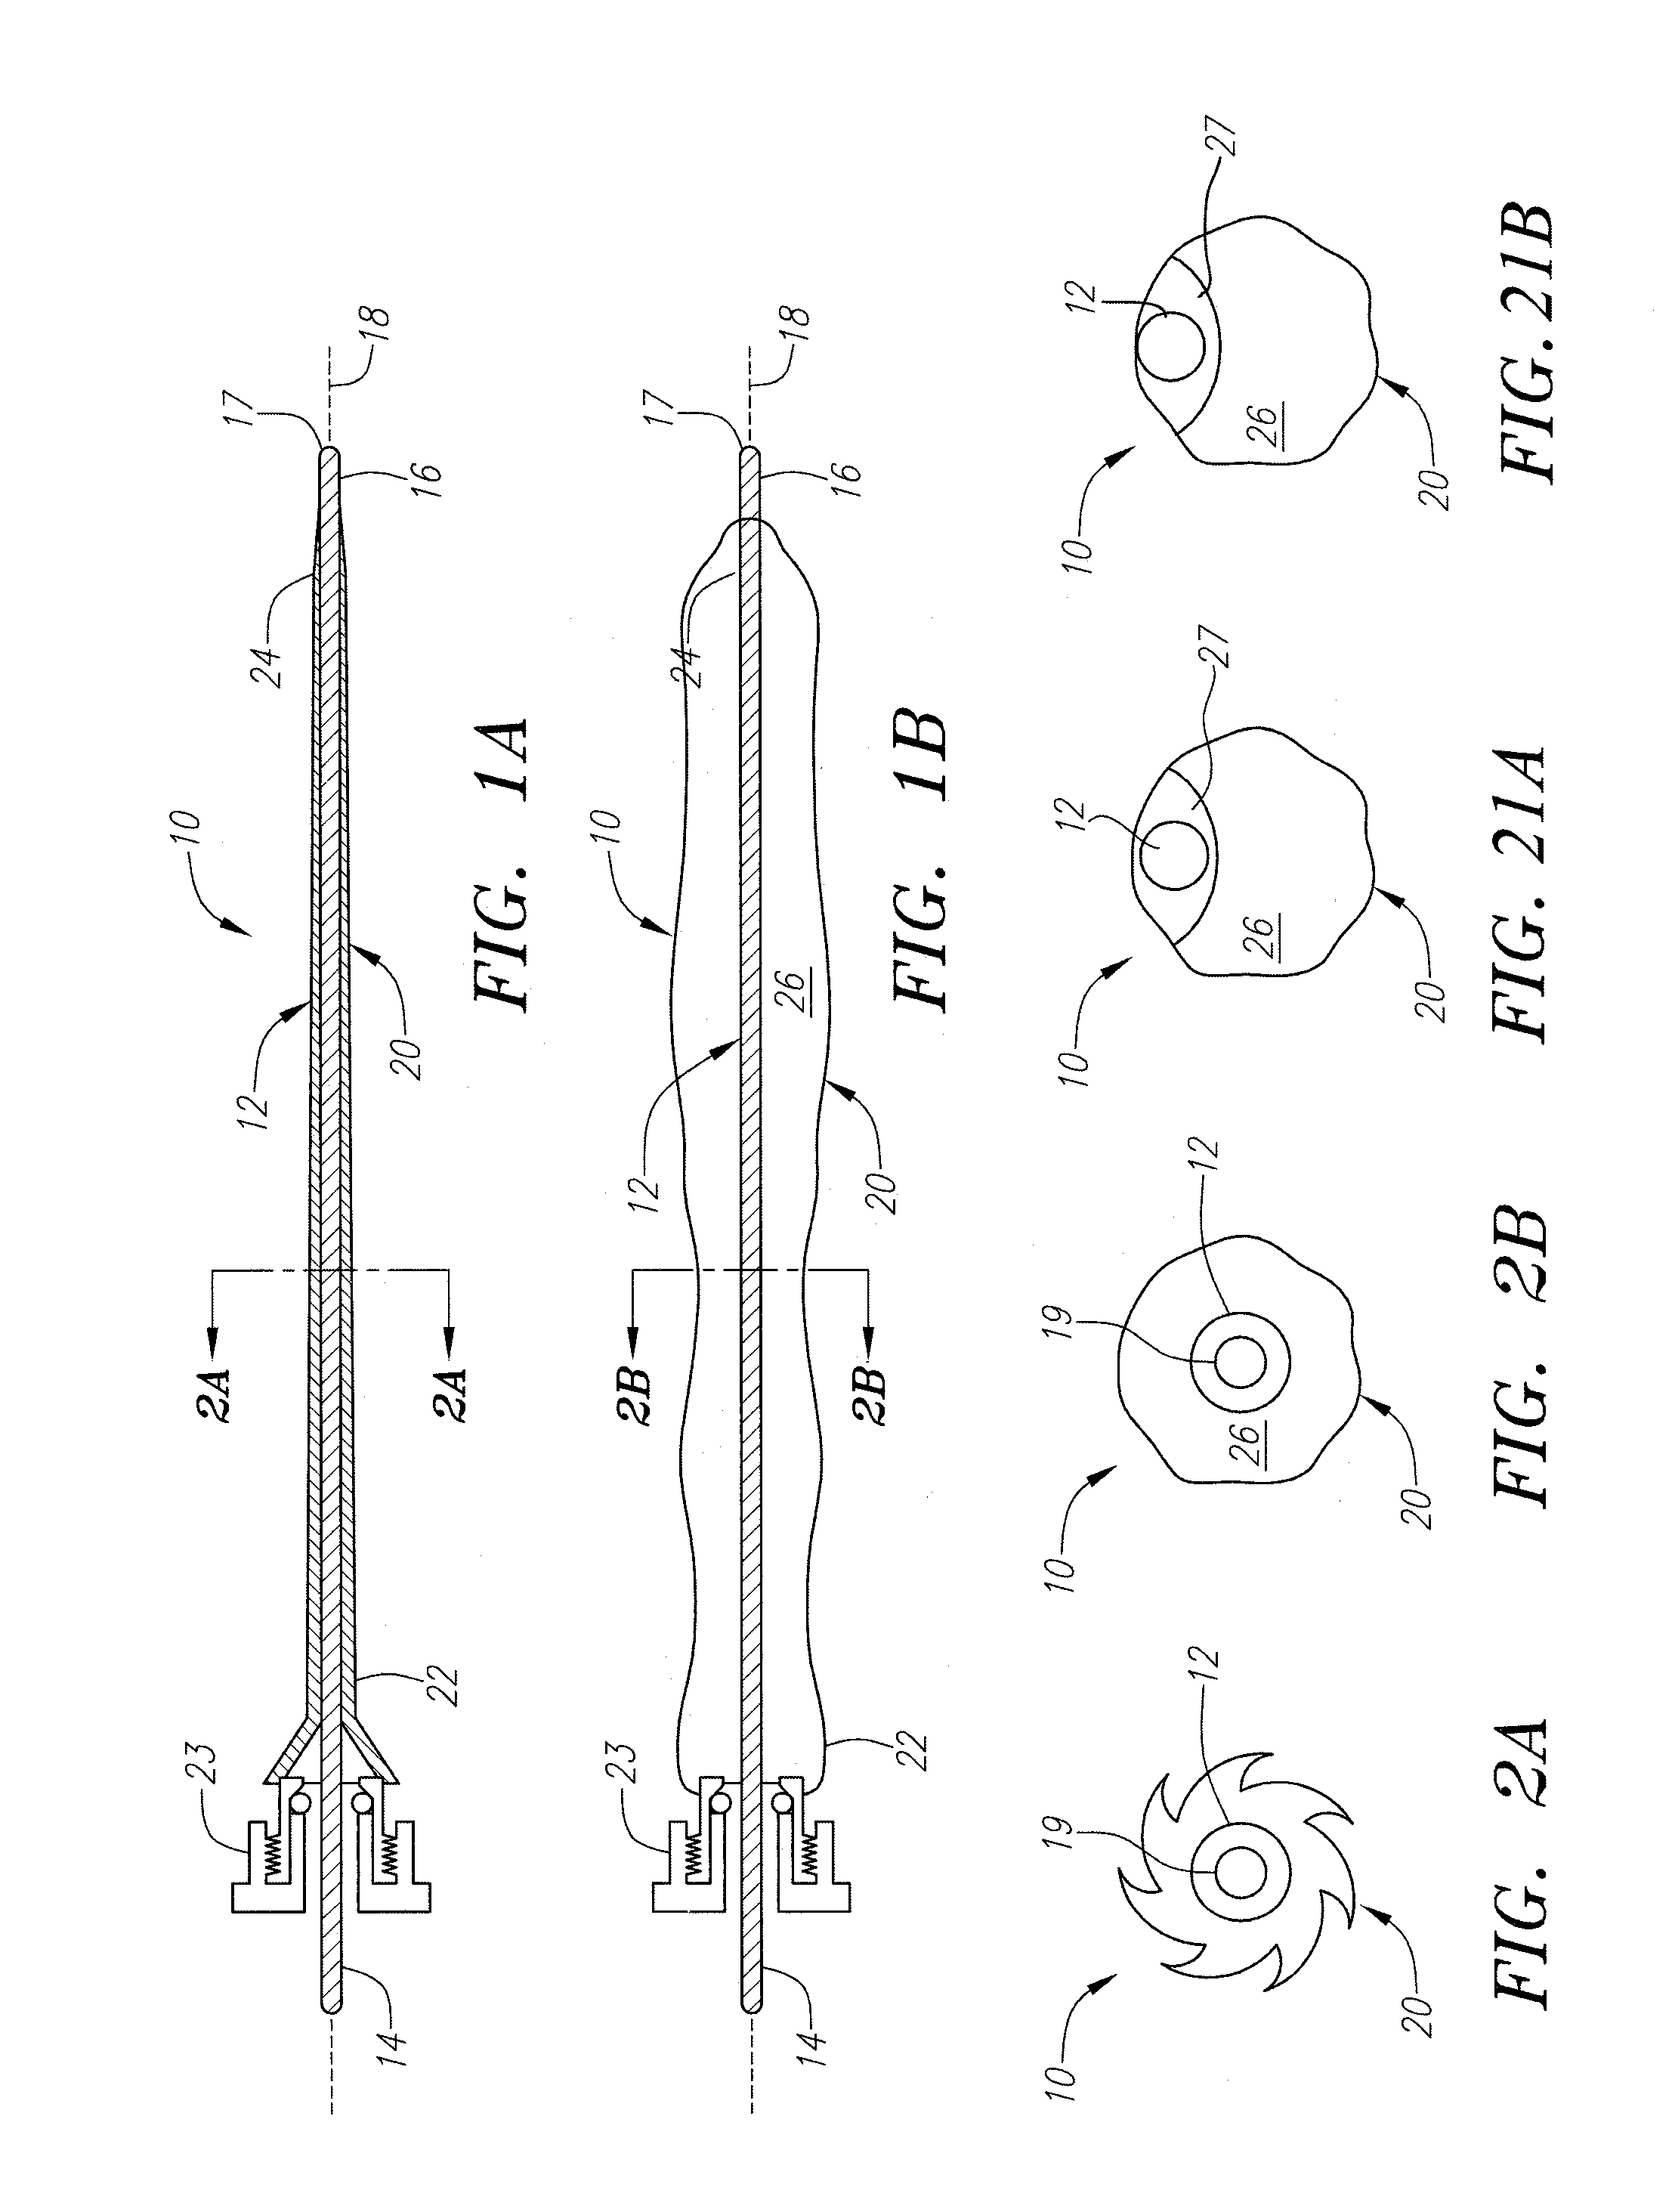 Expandable guide sheath and apparatus and methods using such sheaths